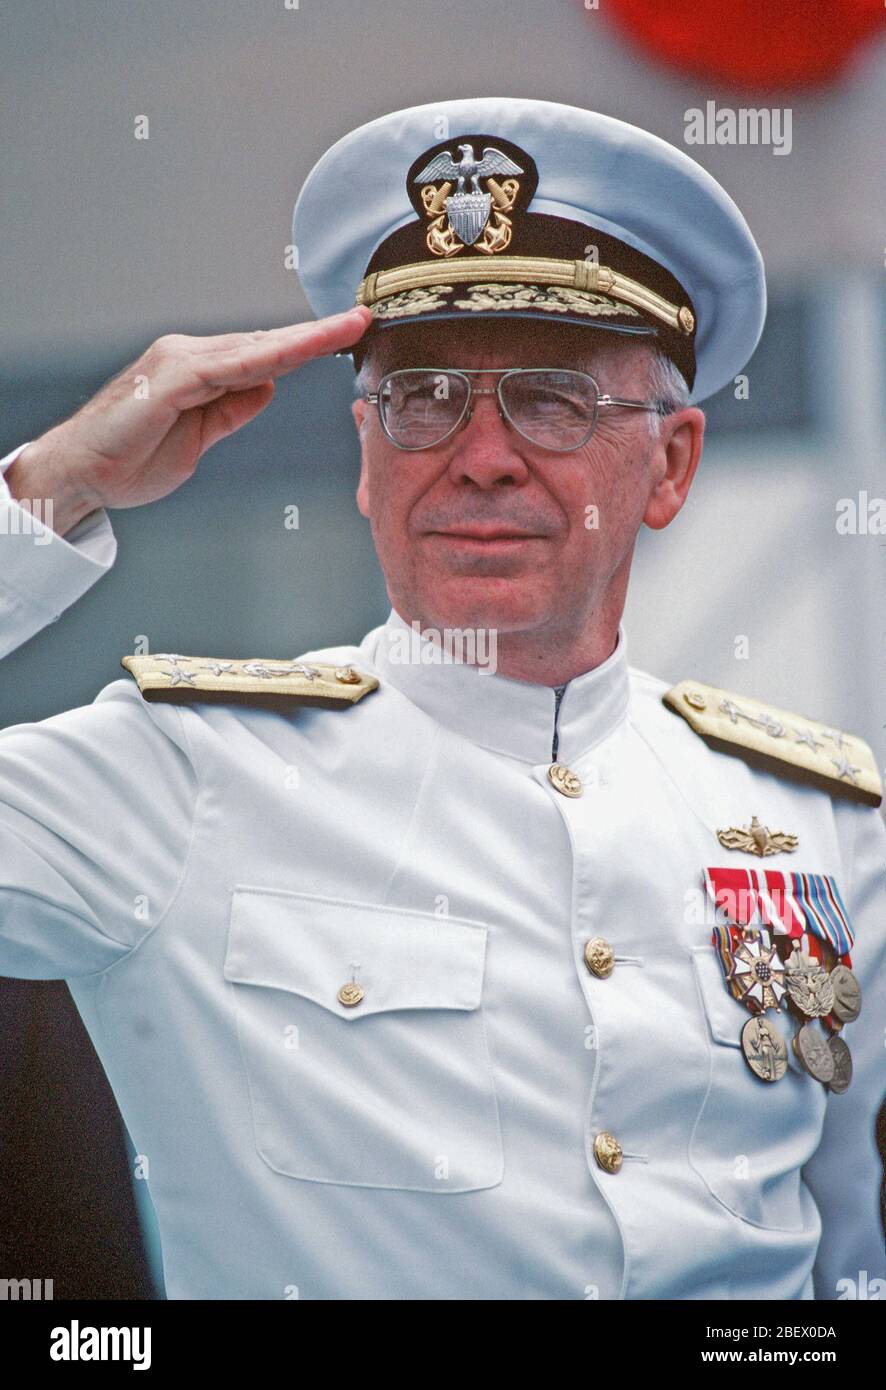 1982 - VADM Robert L. Walters, deputy chief of naval operations, Surface Warfare, salutes during the launching ceremony for the nuclear-powered attack submarine USS BUFFALO (SSN-715). Stock Photo